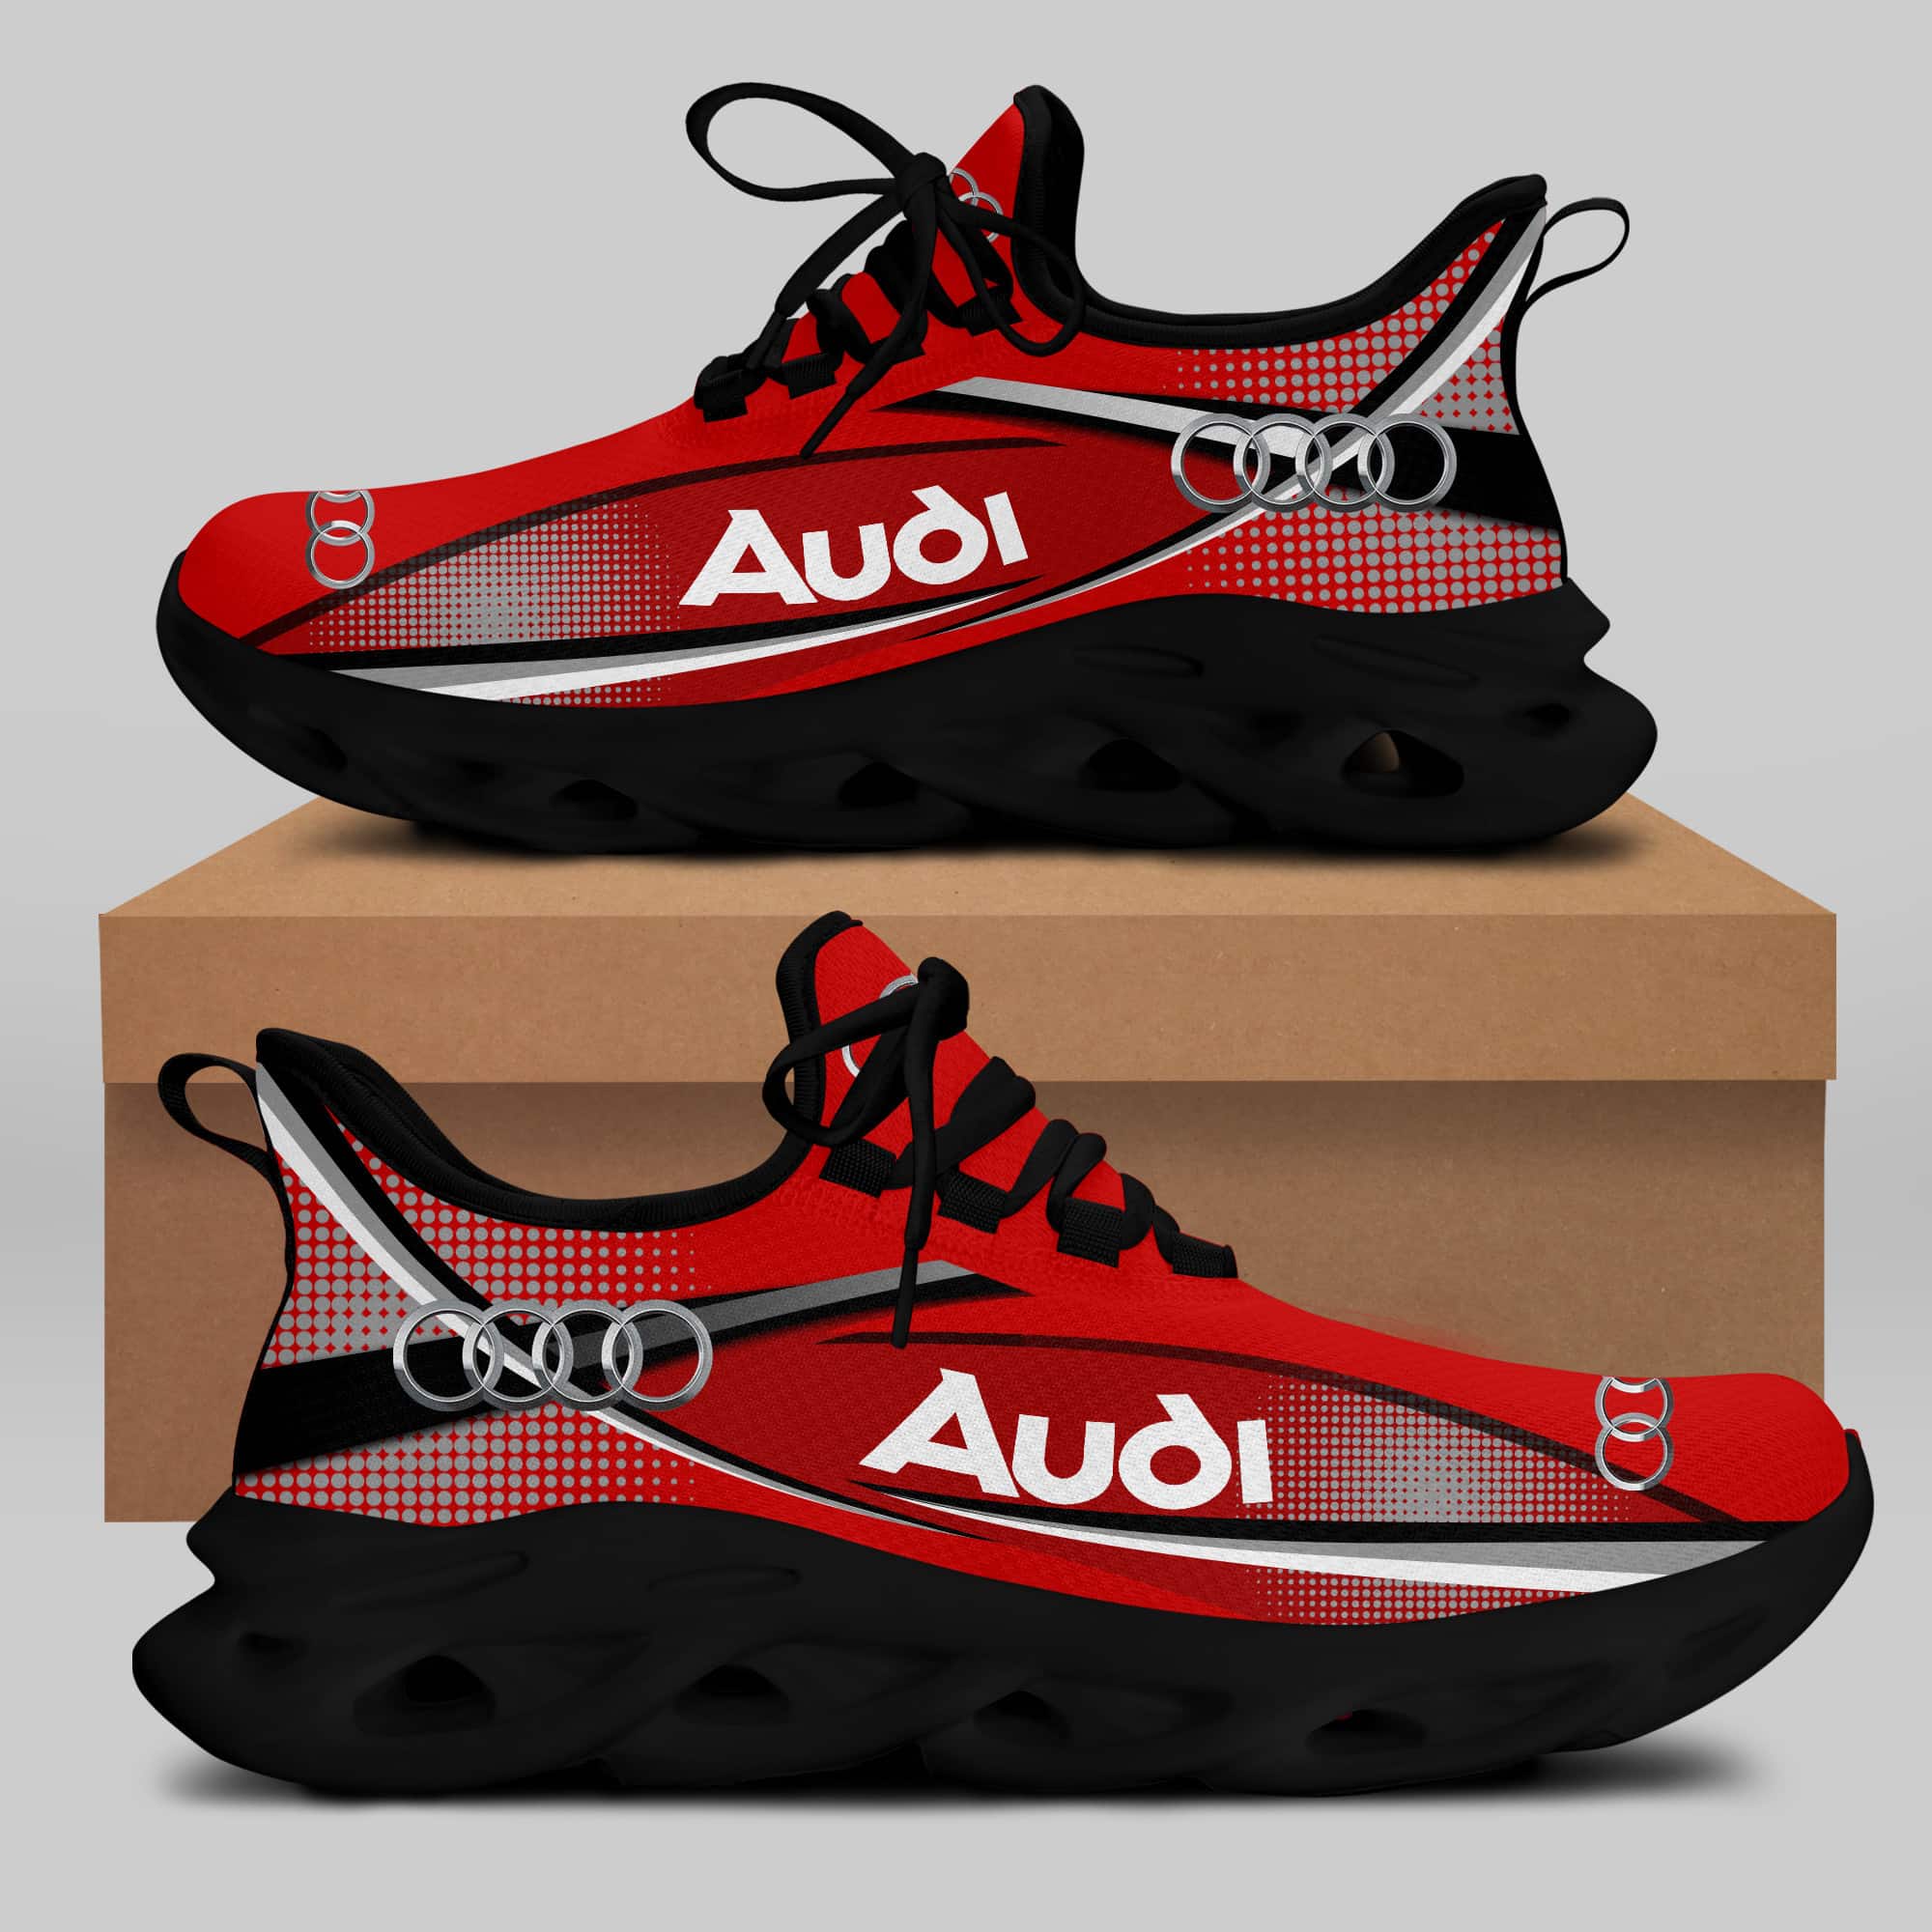 Audi Sport Running Shoes Max Soul Shoes Sneakers Ver 52 1